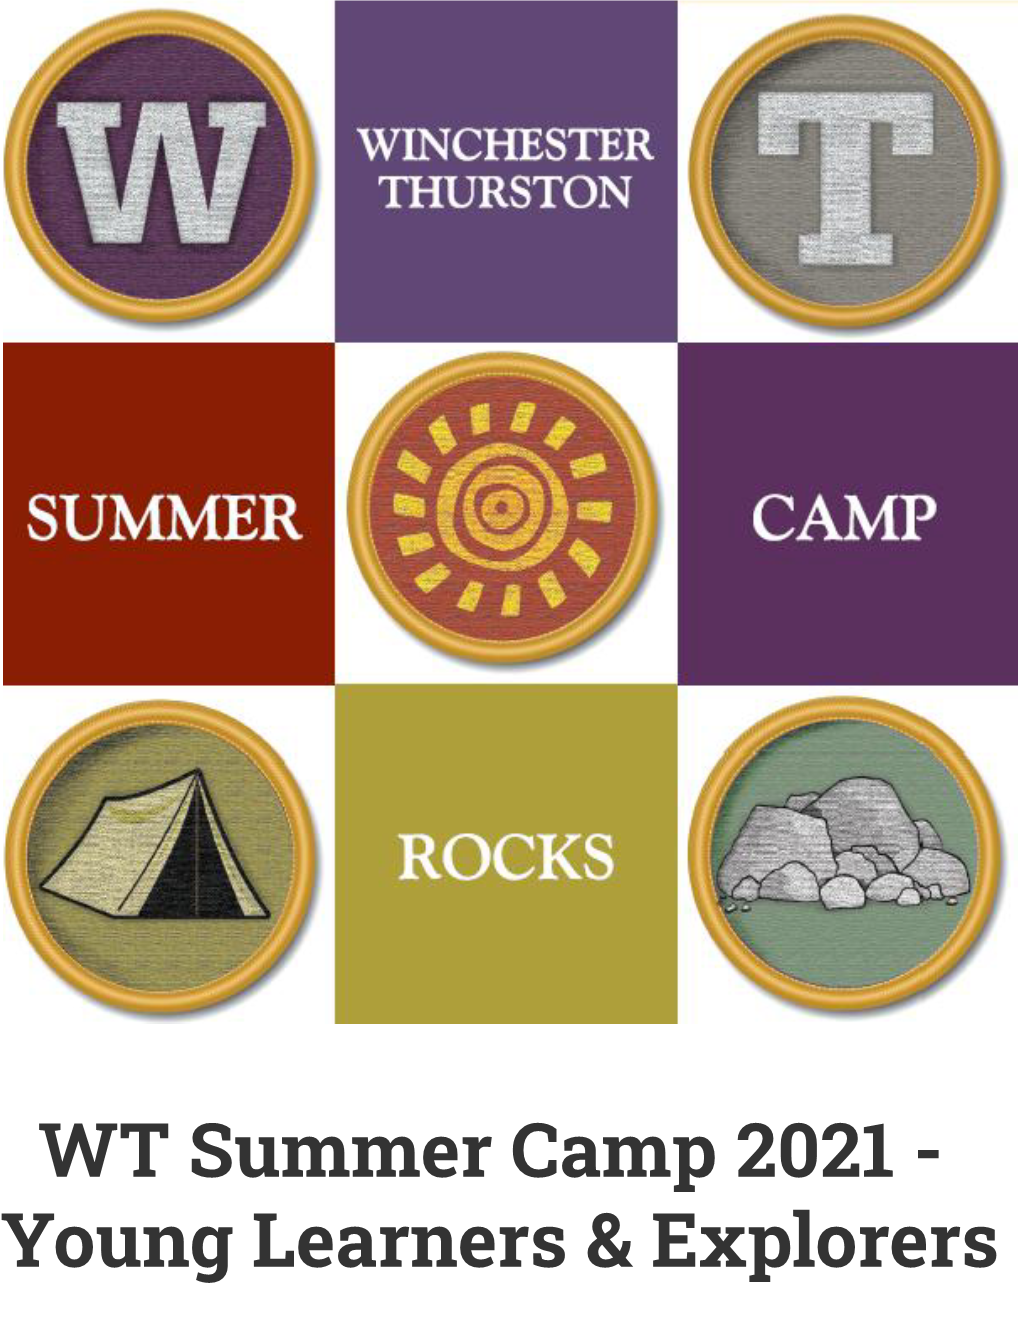 WT Summer Camp 2021 - Young Learners & Explorers WT Summer Camp 2021 Young Learners and Explorers Weeks and Locations